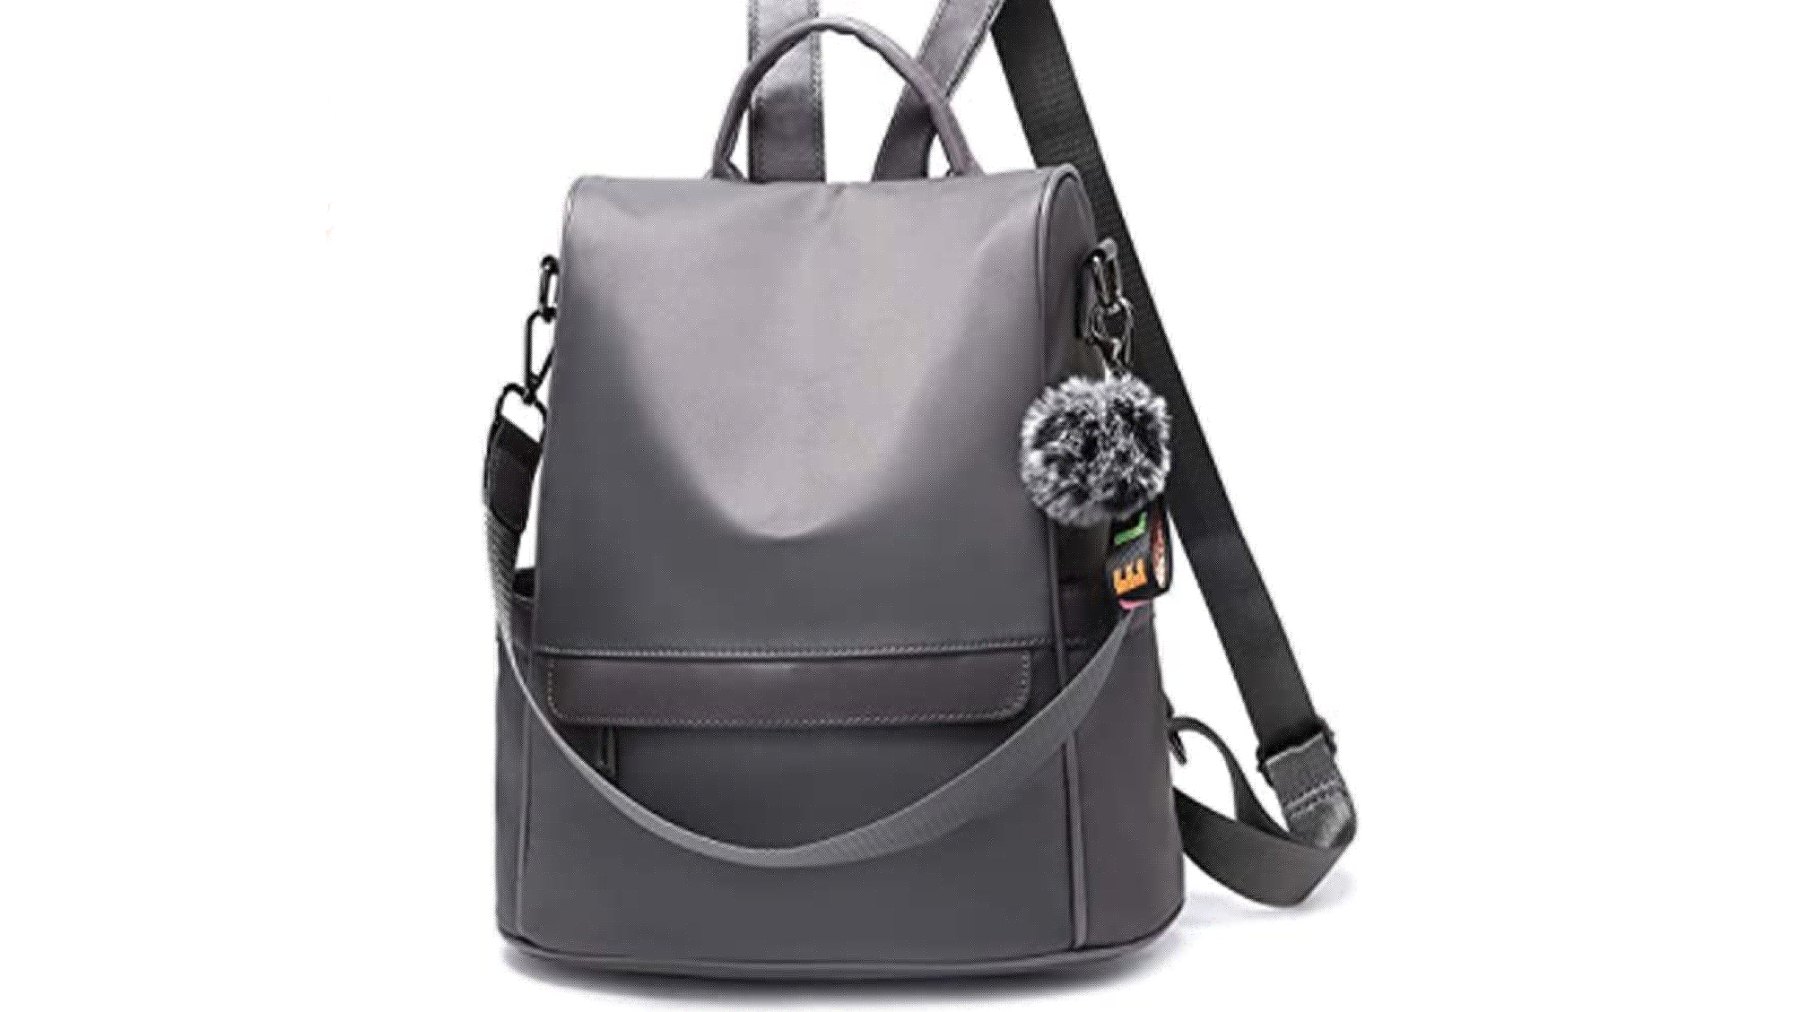 TcIFE Anti-Theft Backpack Is Perfect for Taking On Vacation | Us Weekly